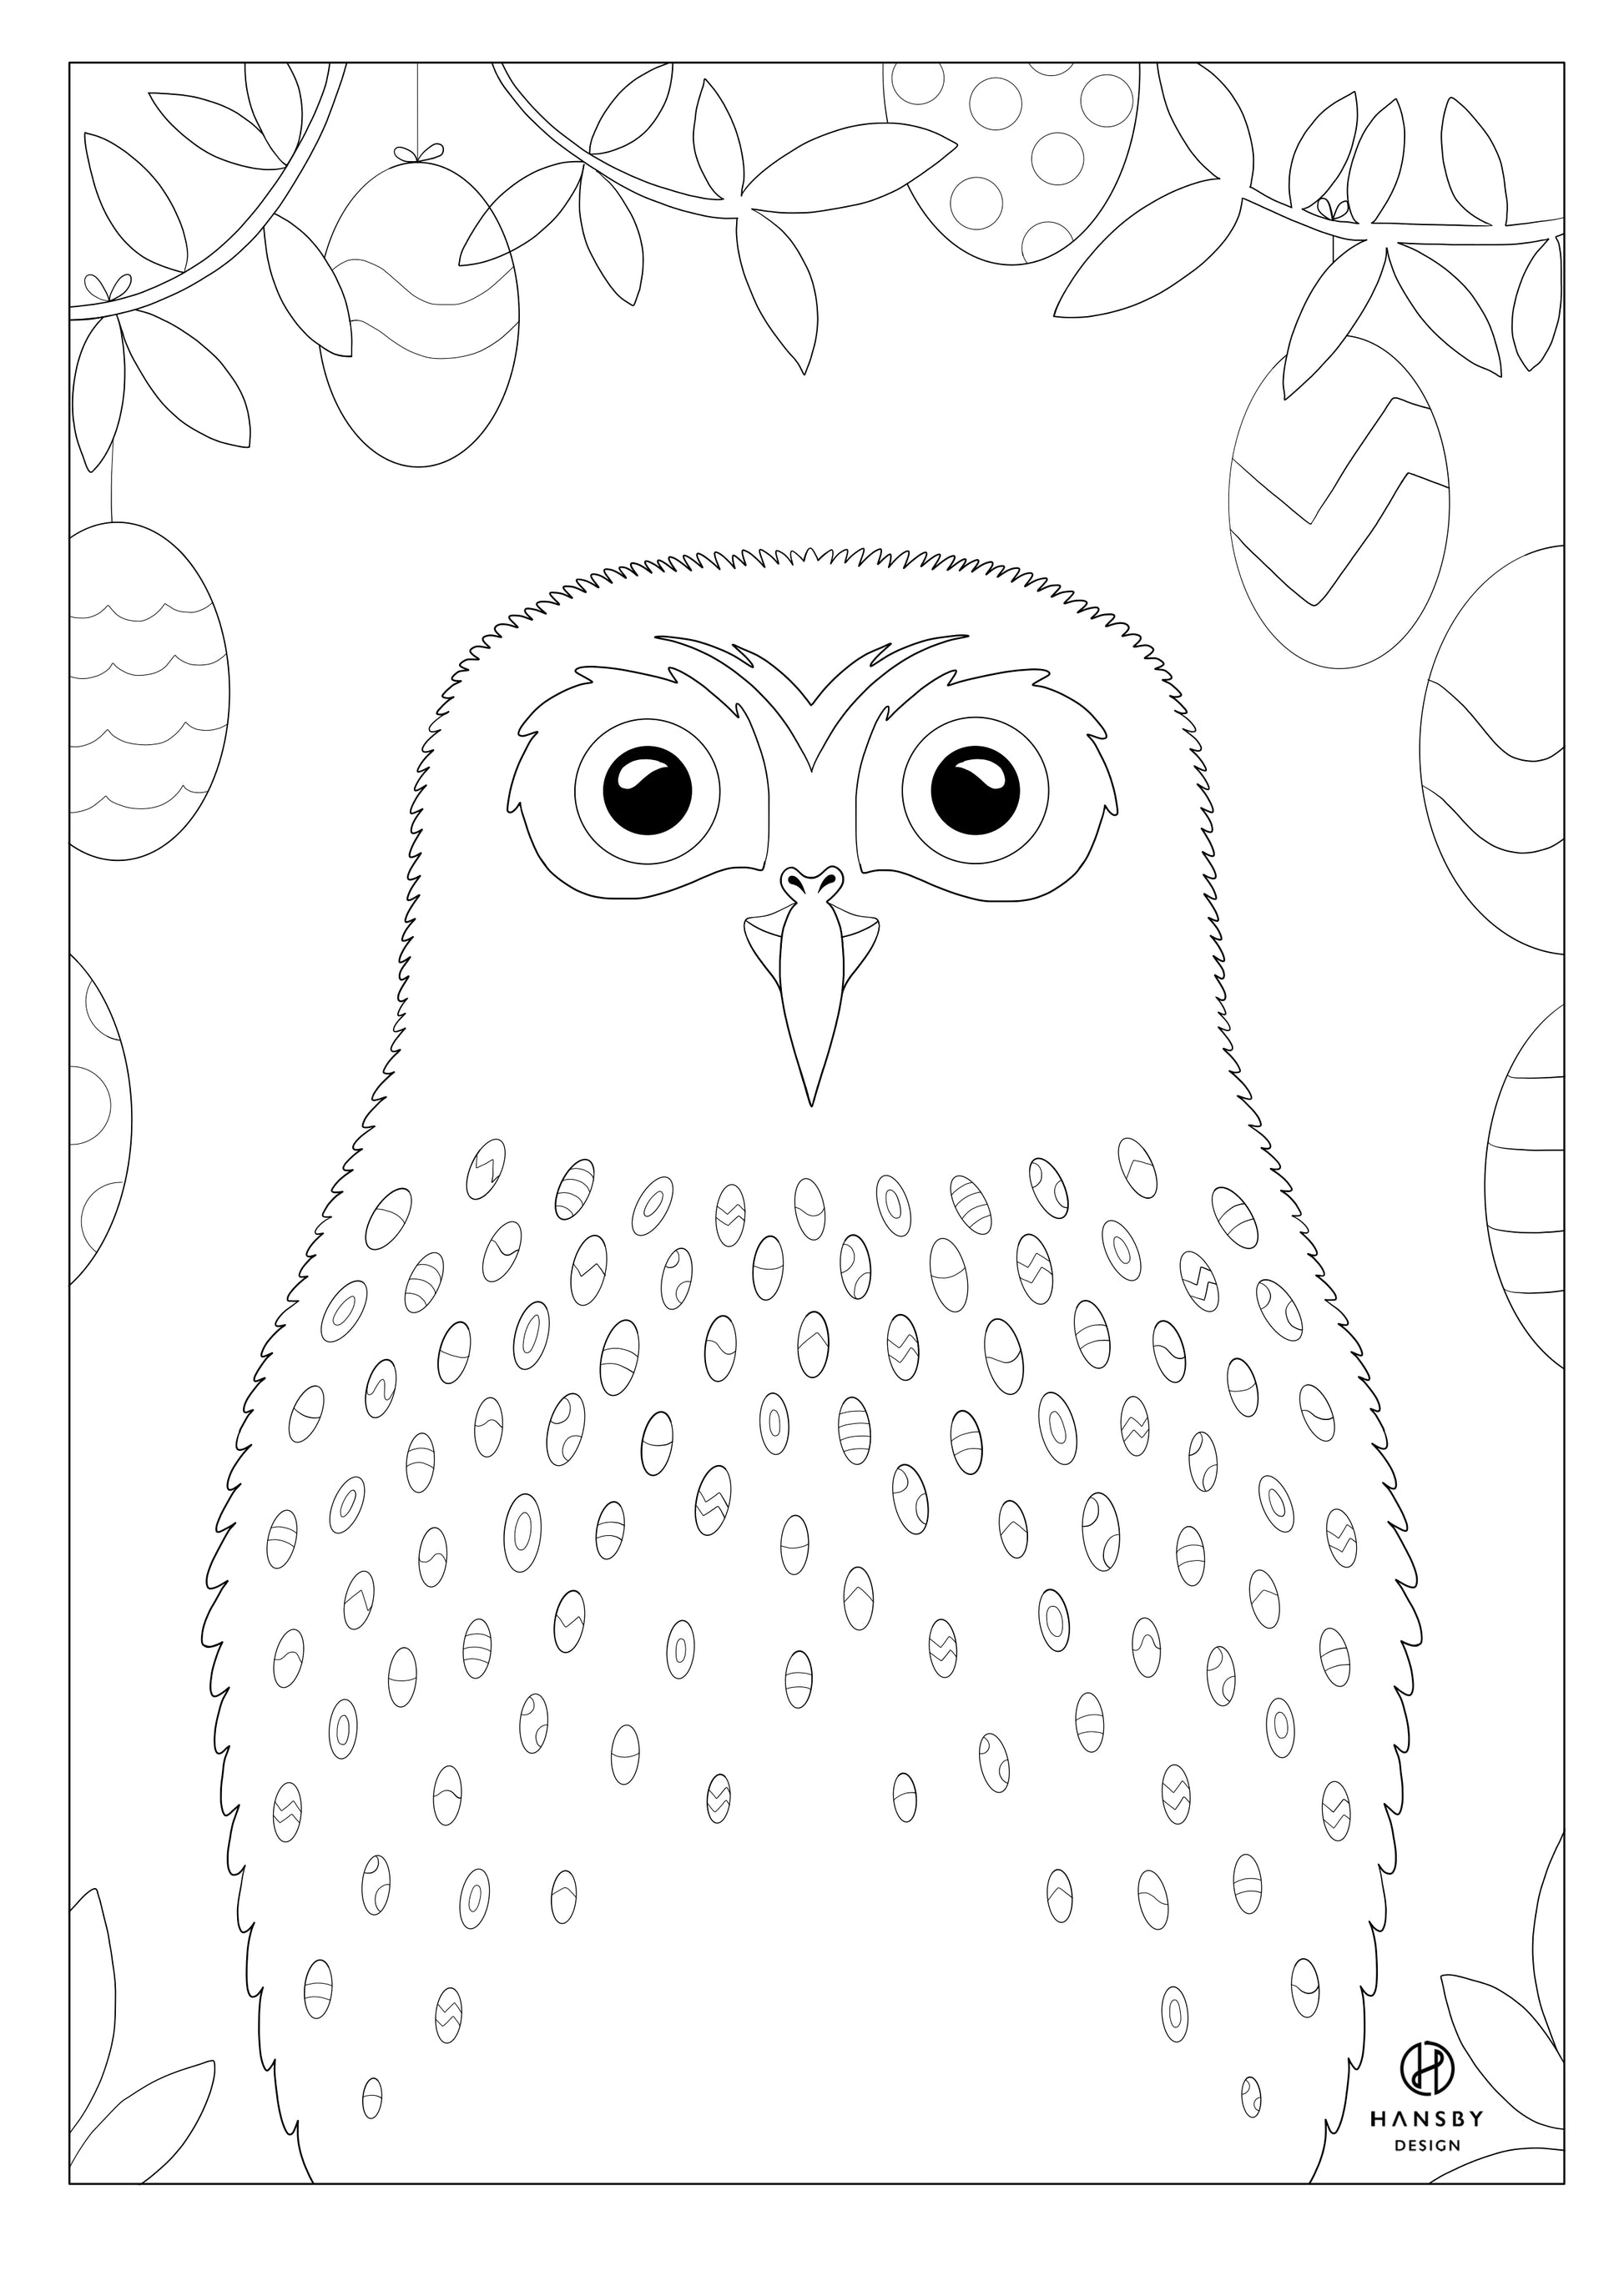 Colouring page of the Morepork owl, by Hansby Design New Zealand